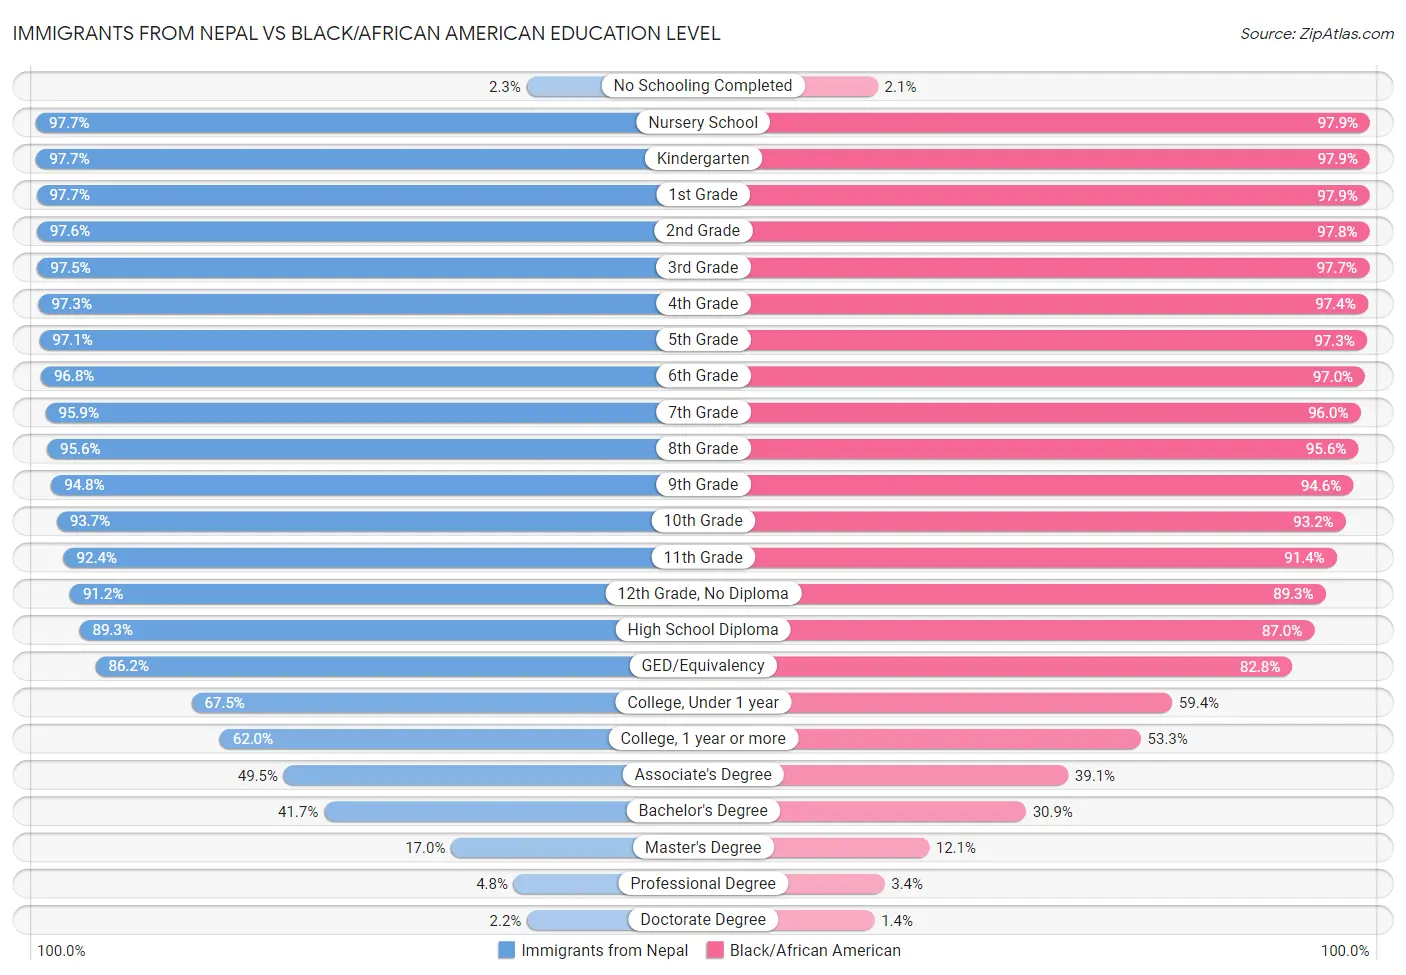 Immigrants from Nepal vs Black/African American Education Level